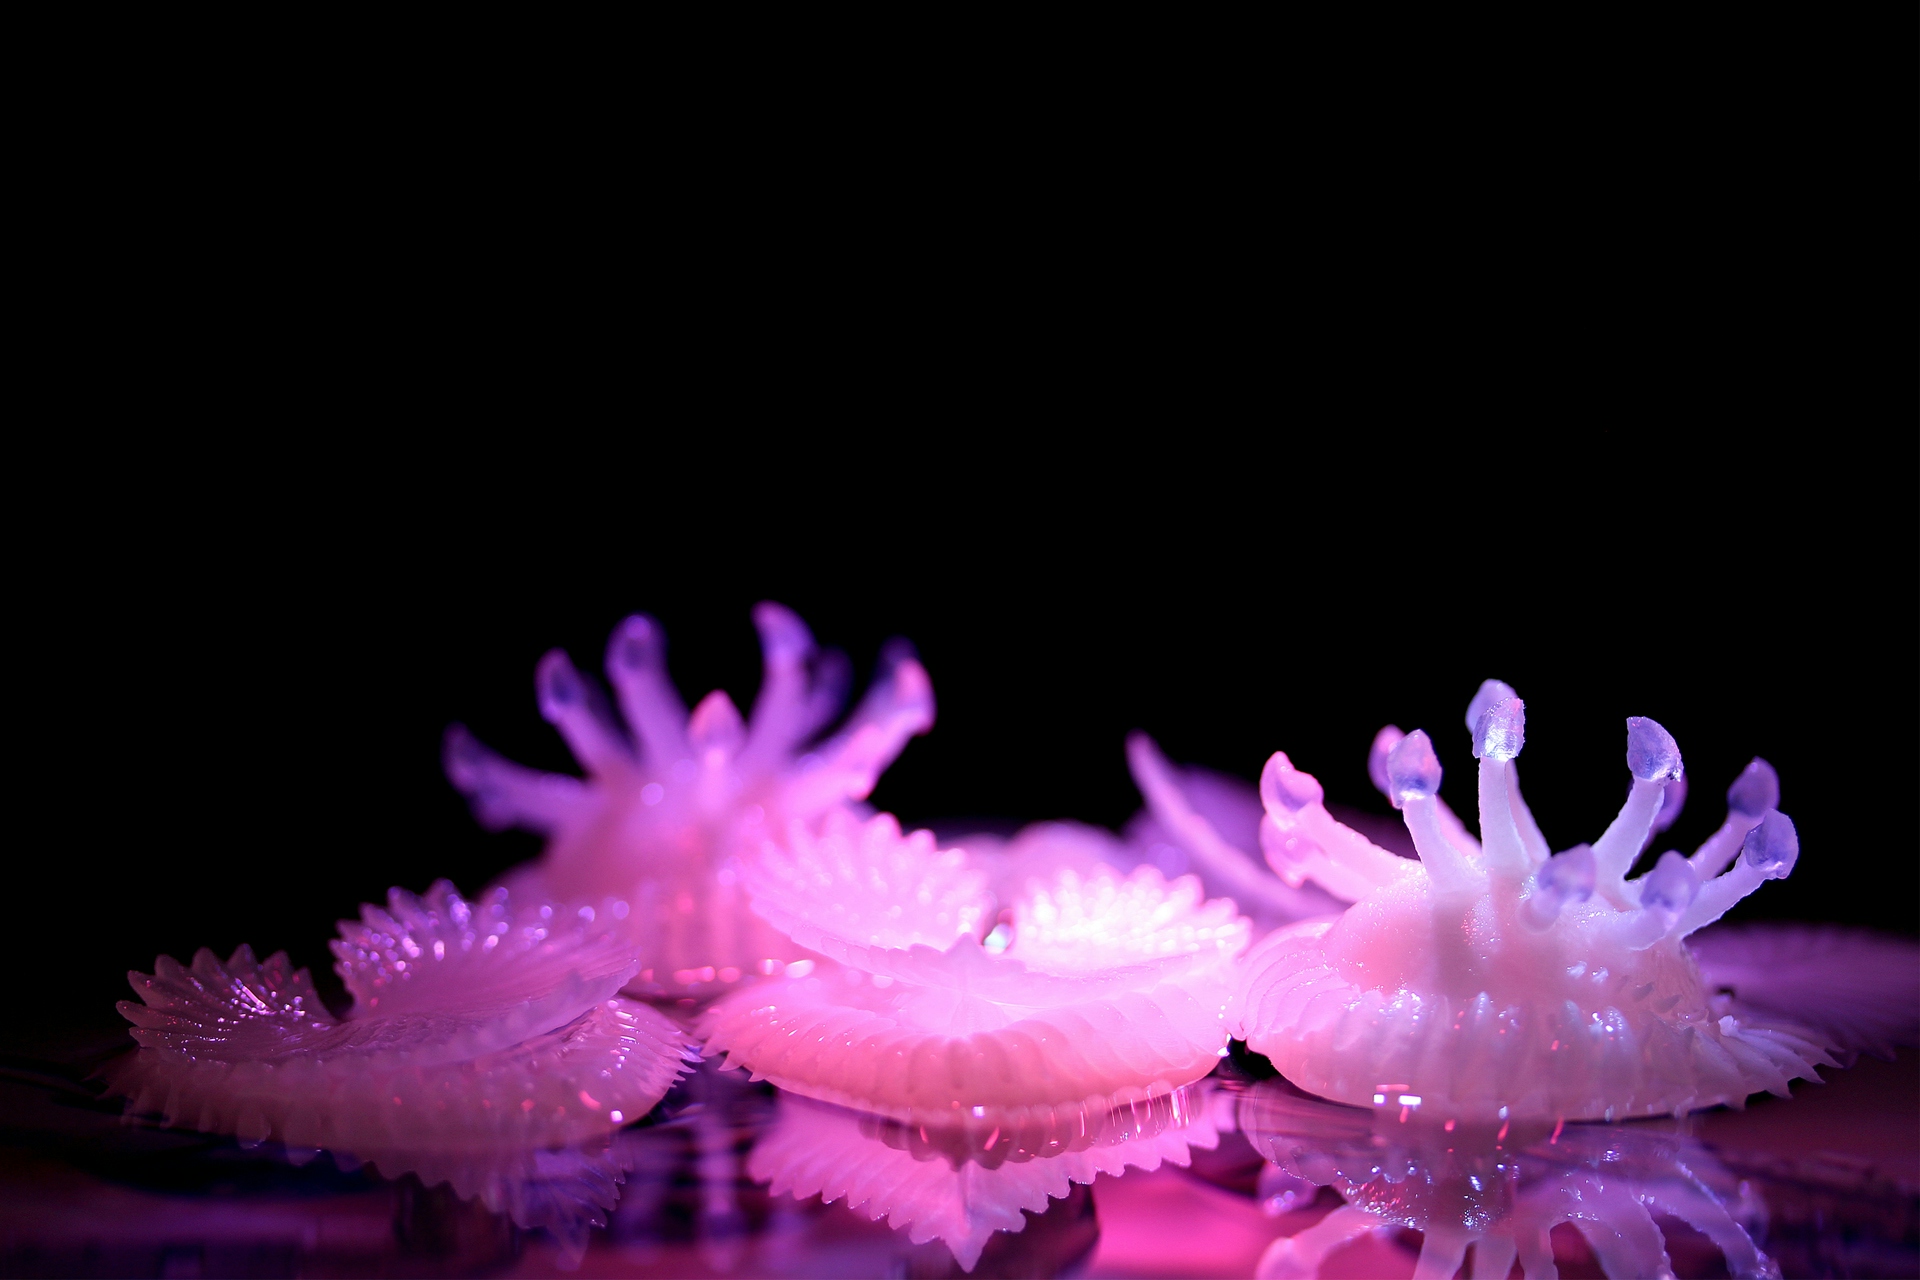 Lily-like 3D prints sitting on water.